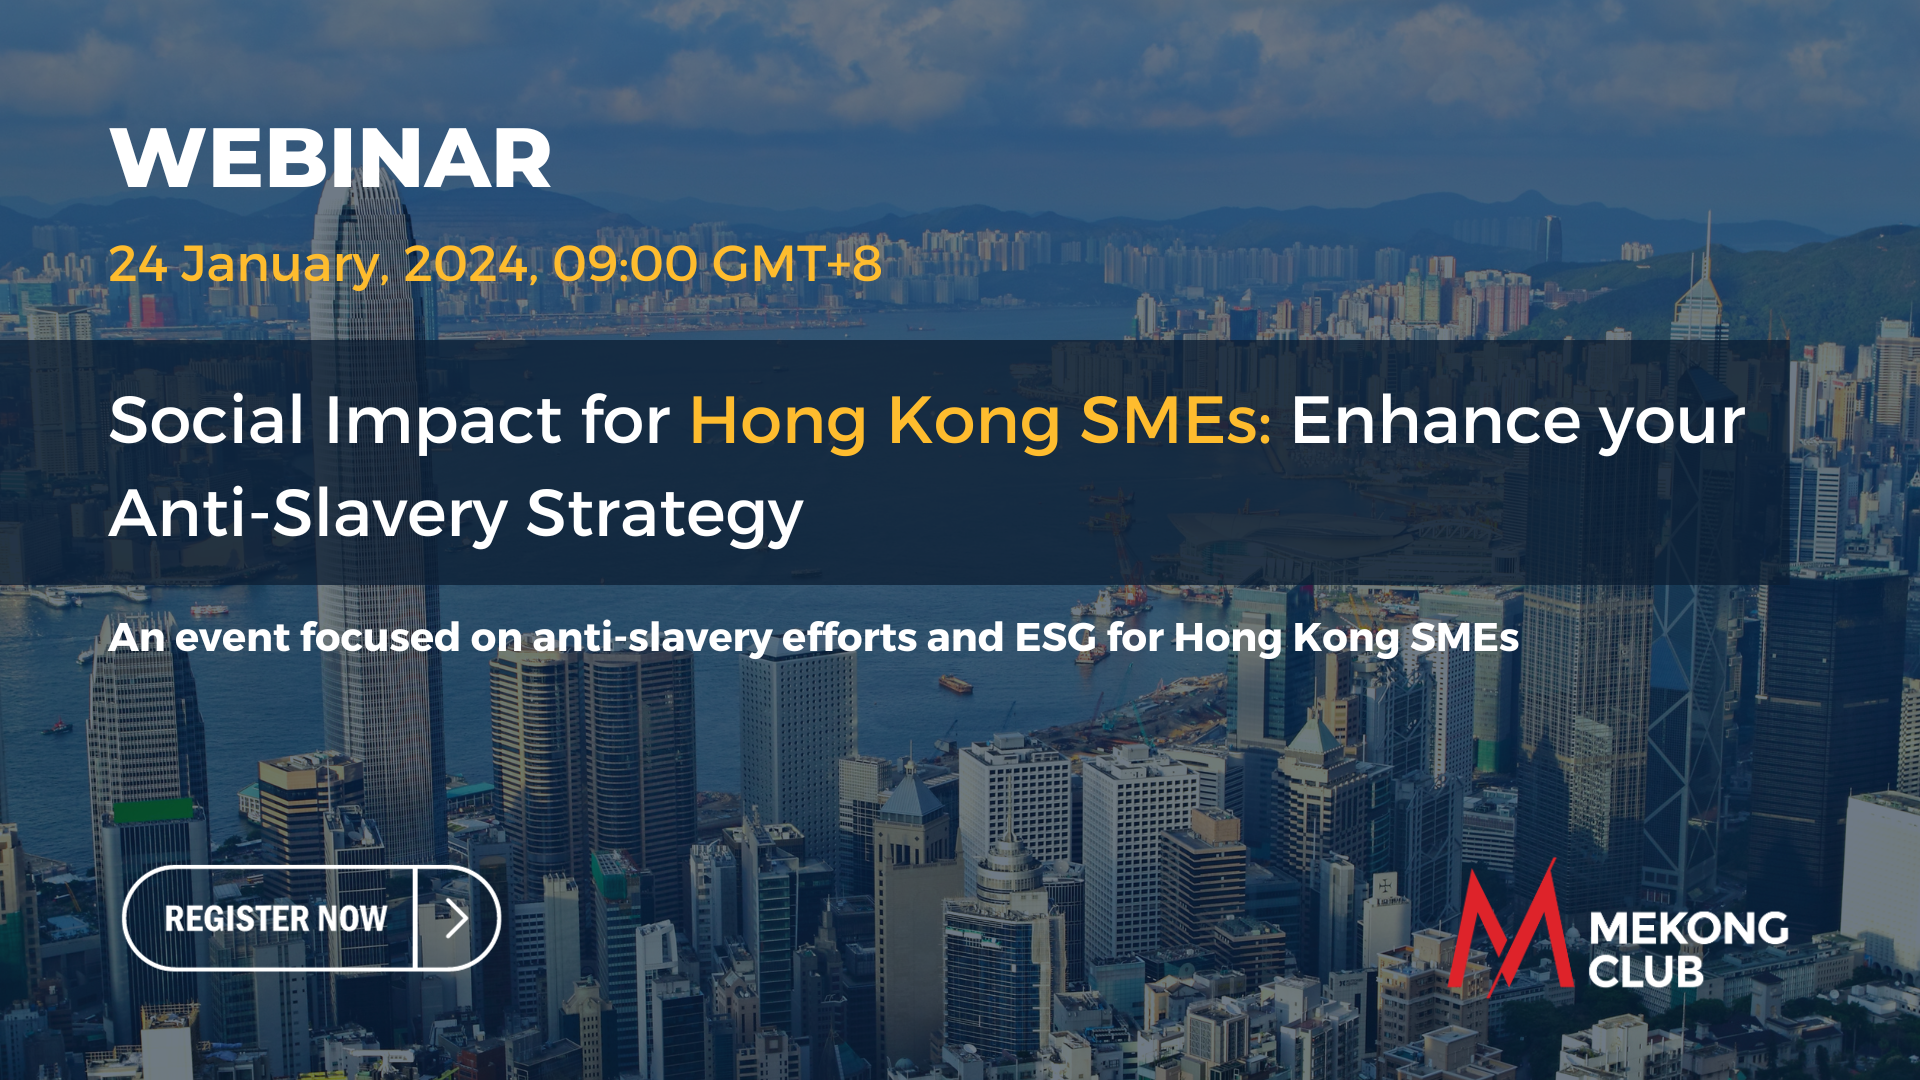 Join Industry Leaders in Hong Kong: Enhance Your SME’s Impact